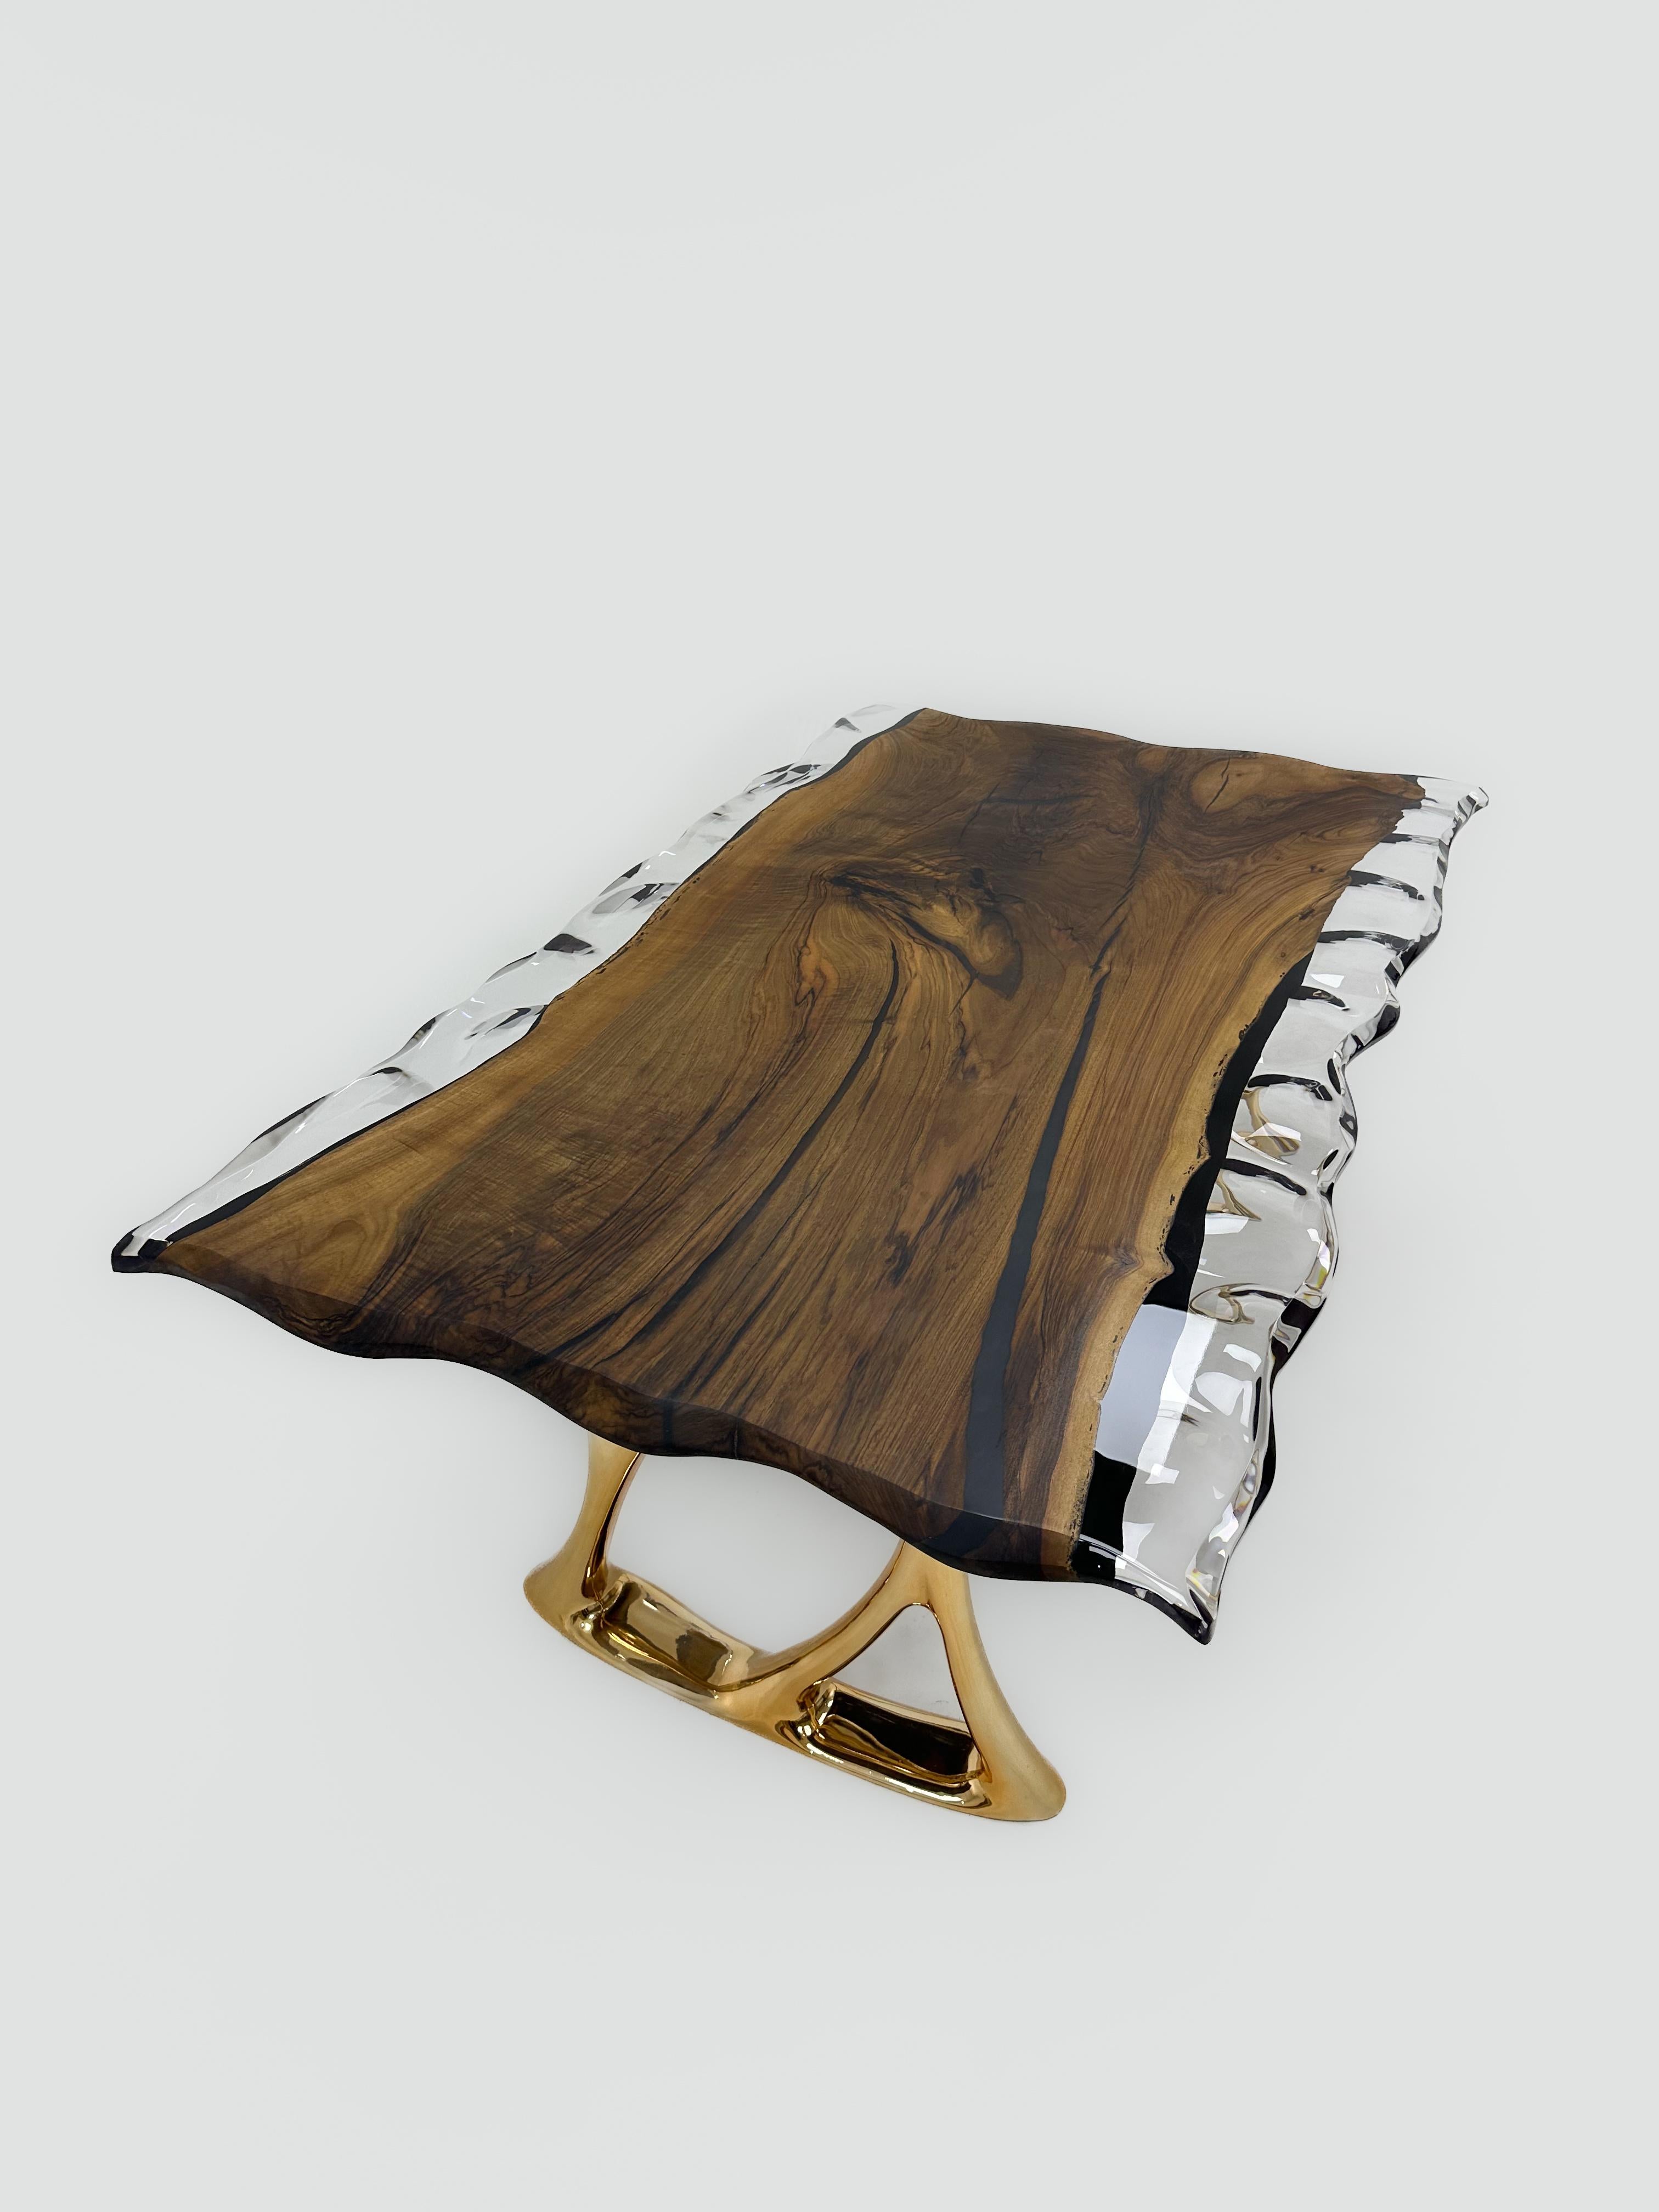 Custom Clear Epoxy Resin Walnut Wood Dining Table - Natural Wood Table In New Condition For Sale In İnegöl, TR